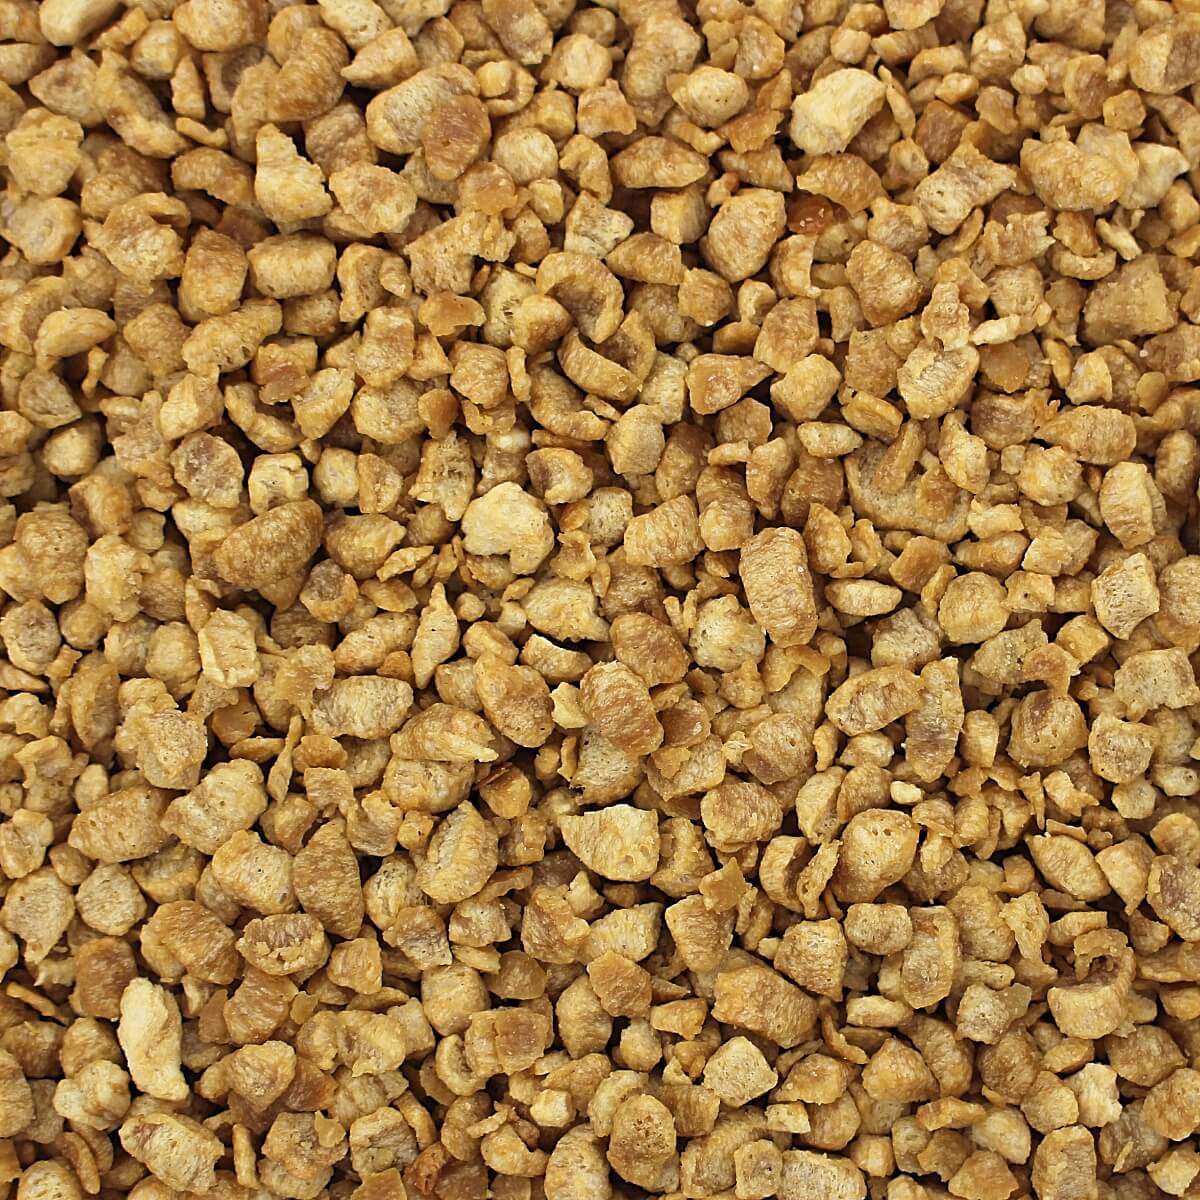 A close up image of a pile of brown granola from Harmony House Deluxe Plant-Based Protein Sampler.